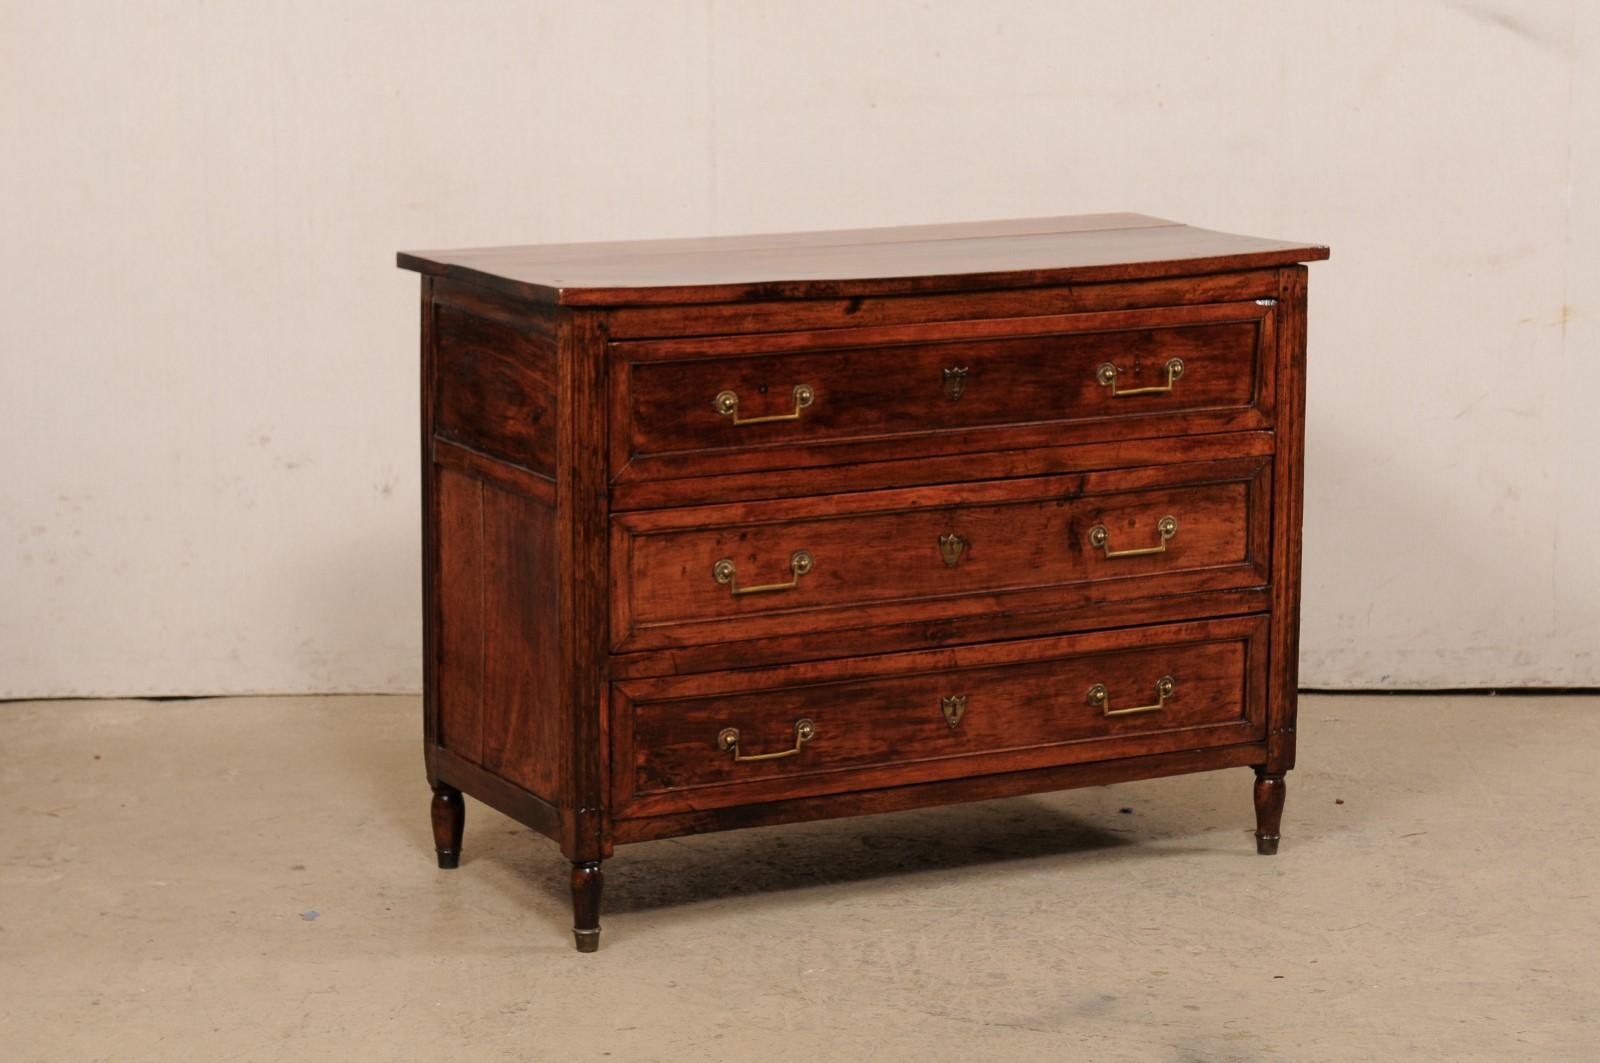 A French carved-wood chest of drawers from the early 19th century. This antique chest from France has a rectangular shaped top which slightly overhangs the case beneath which houses three dovetailed and graduated, recessed panel drawers, fitted with